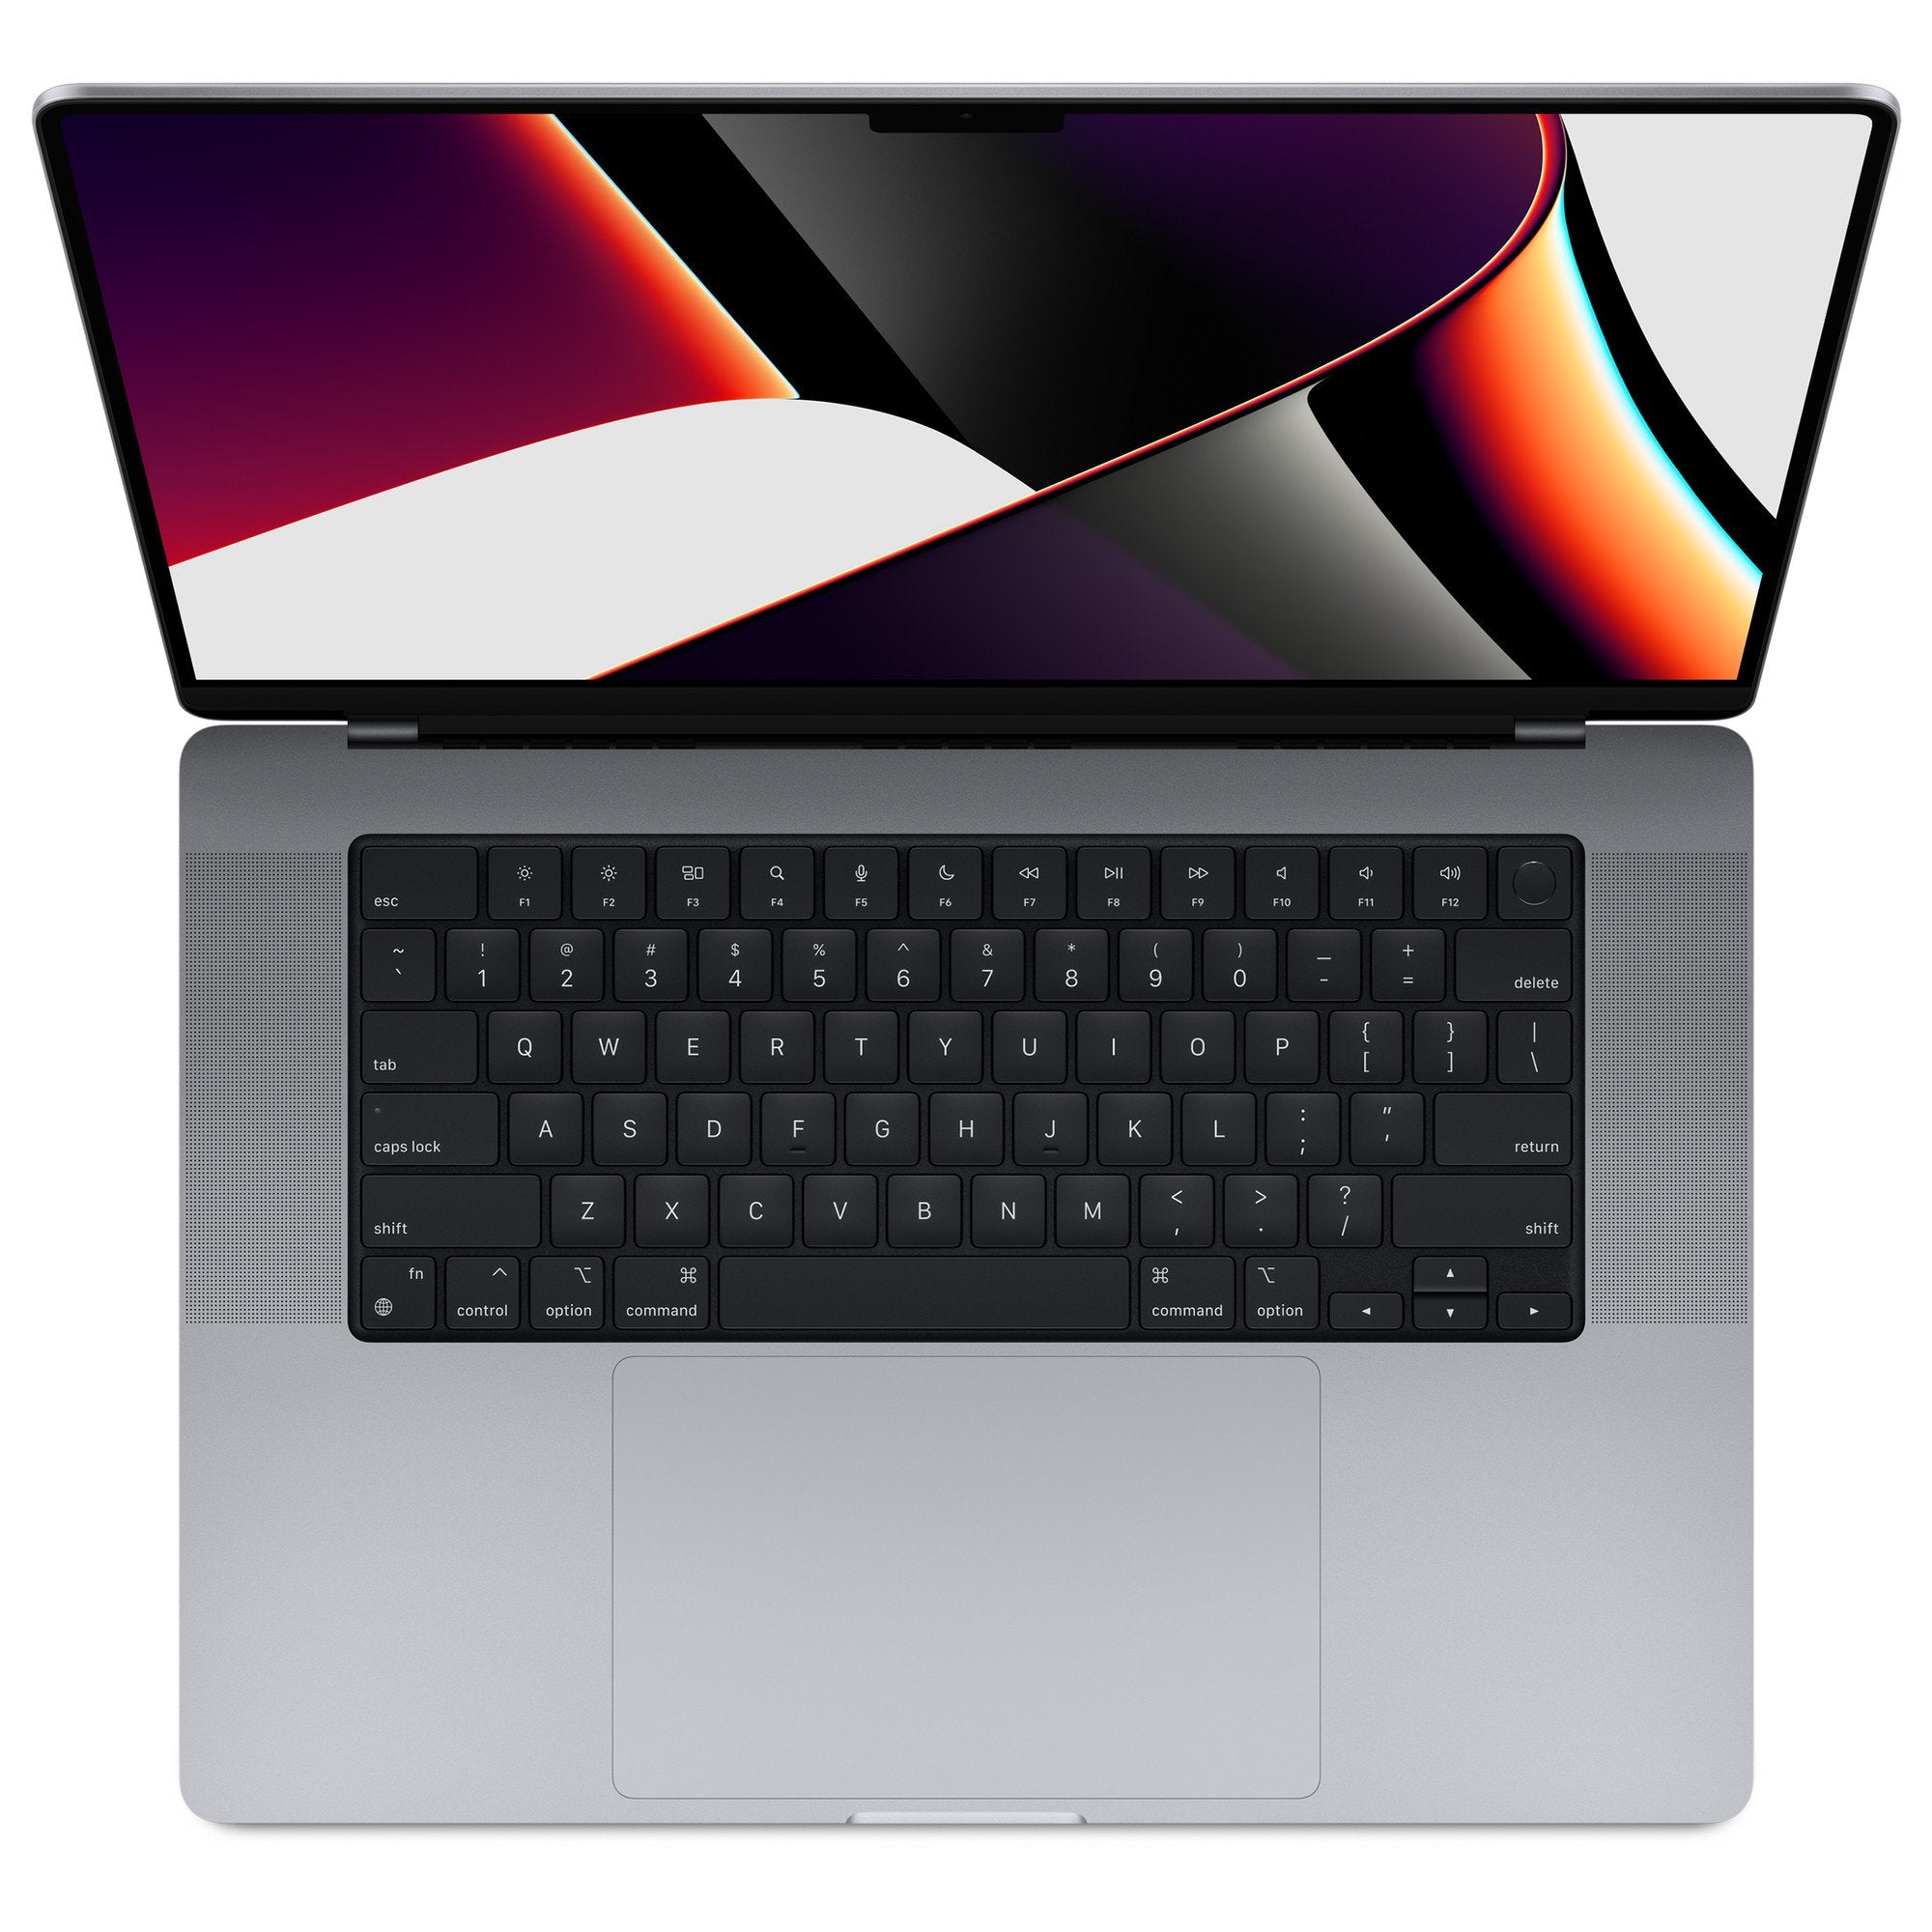 MK1F3AB/A/Apple 16-inch MacBook Pro: Apple M1 Pro chip with 10?core CPU and 16?core GPU, 1TB SSD - S 1TB / Space grey / M1 Chip